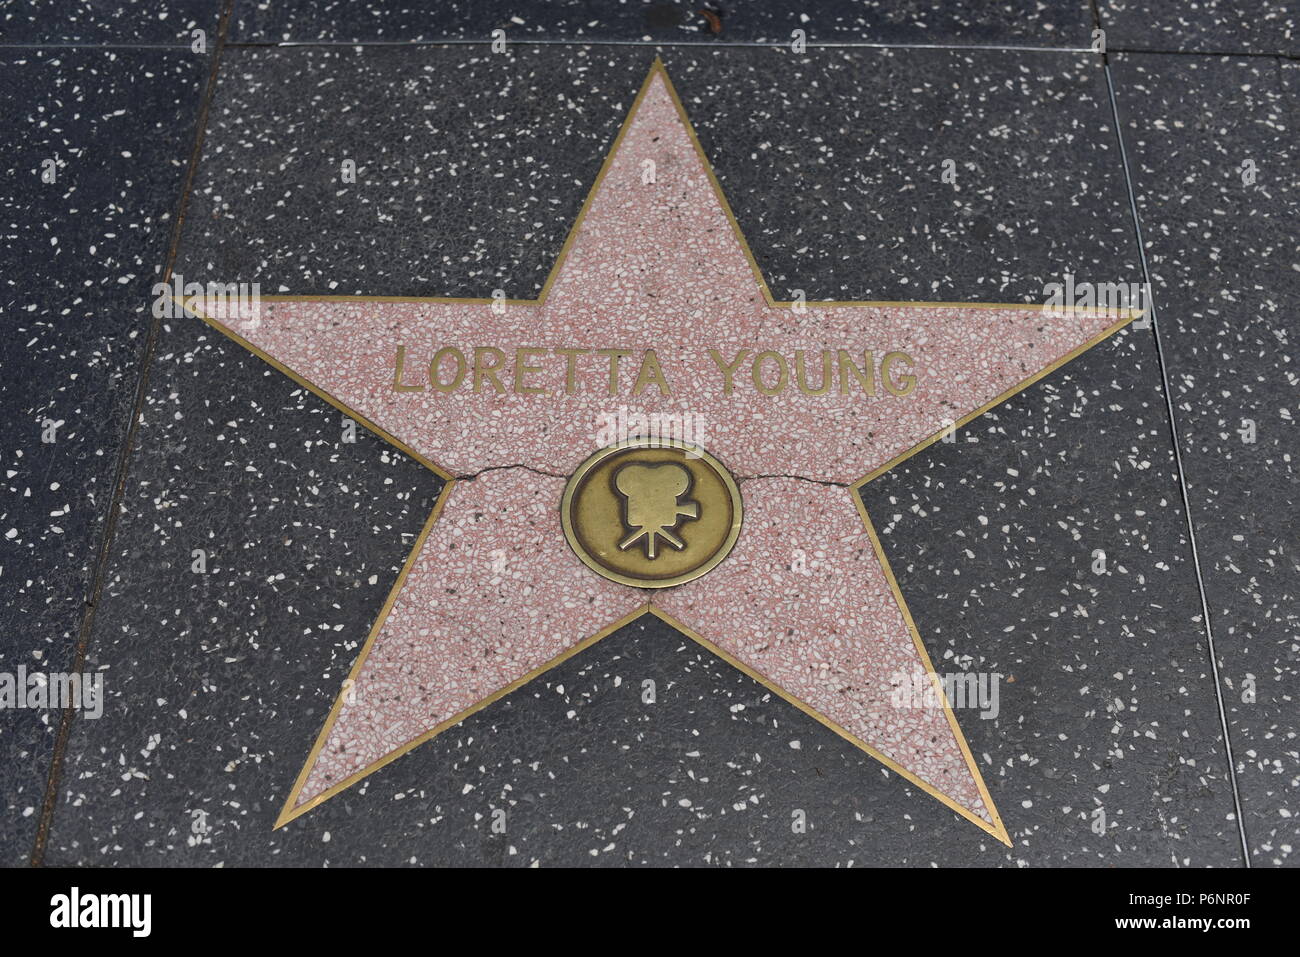 HOLLYWOOD, CA - June 29: Loretta Young star on the Hollywood Walk of Fame in Hollywood, California on June 29, 2018. Stock Photo